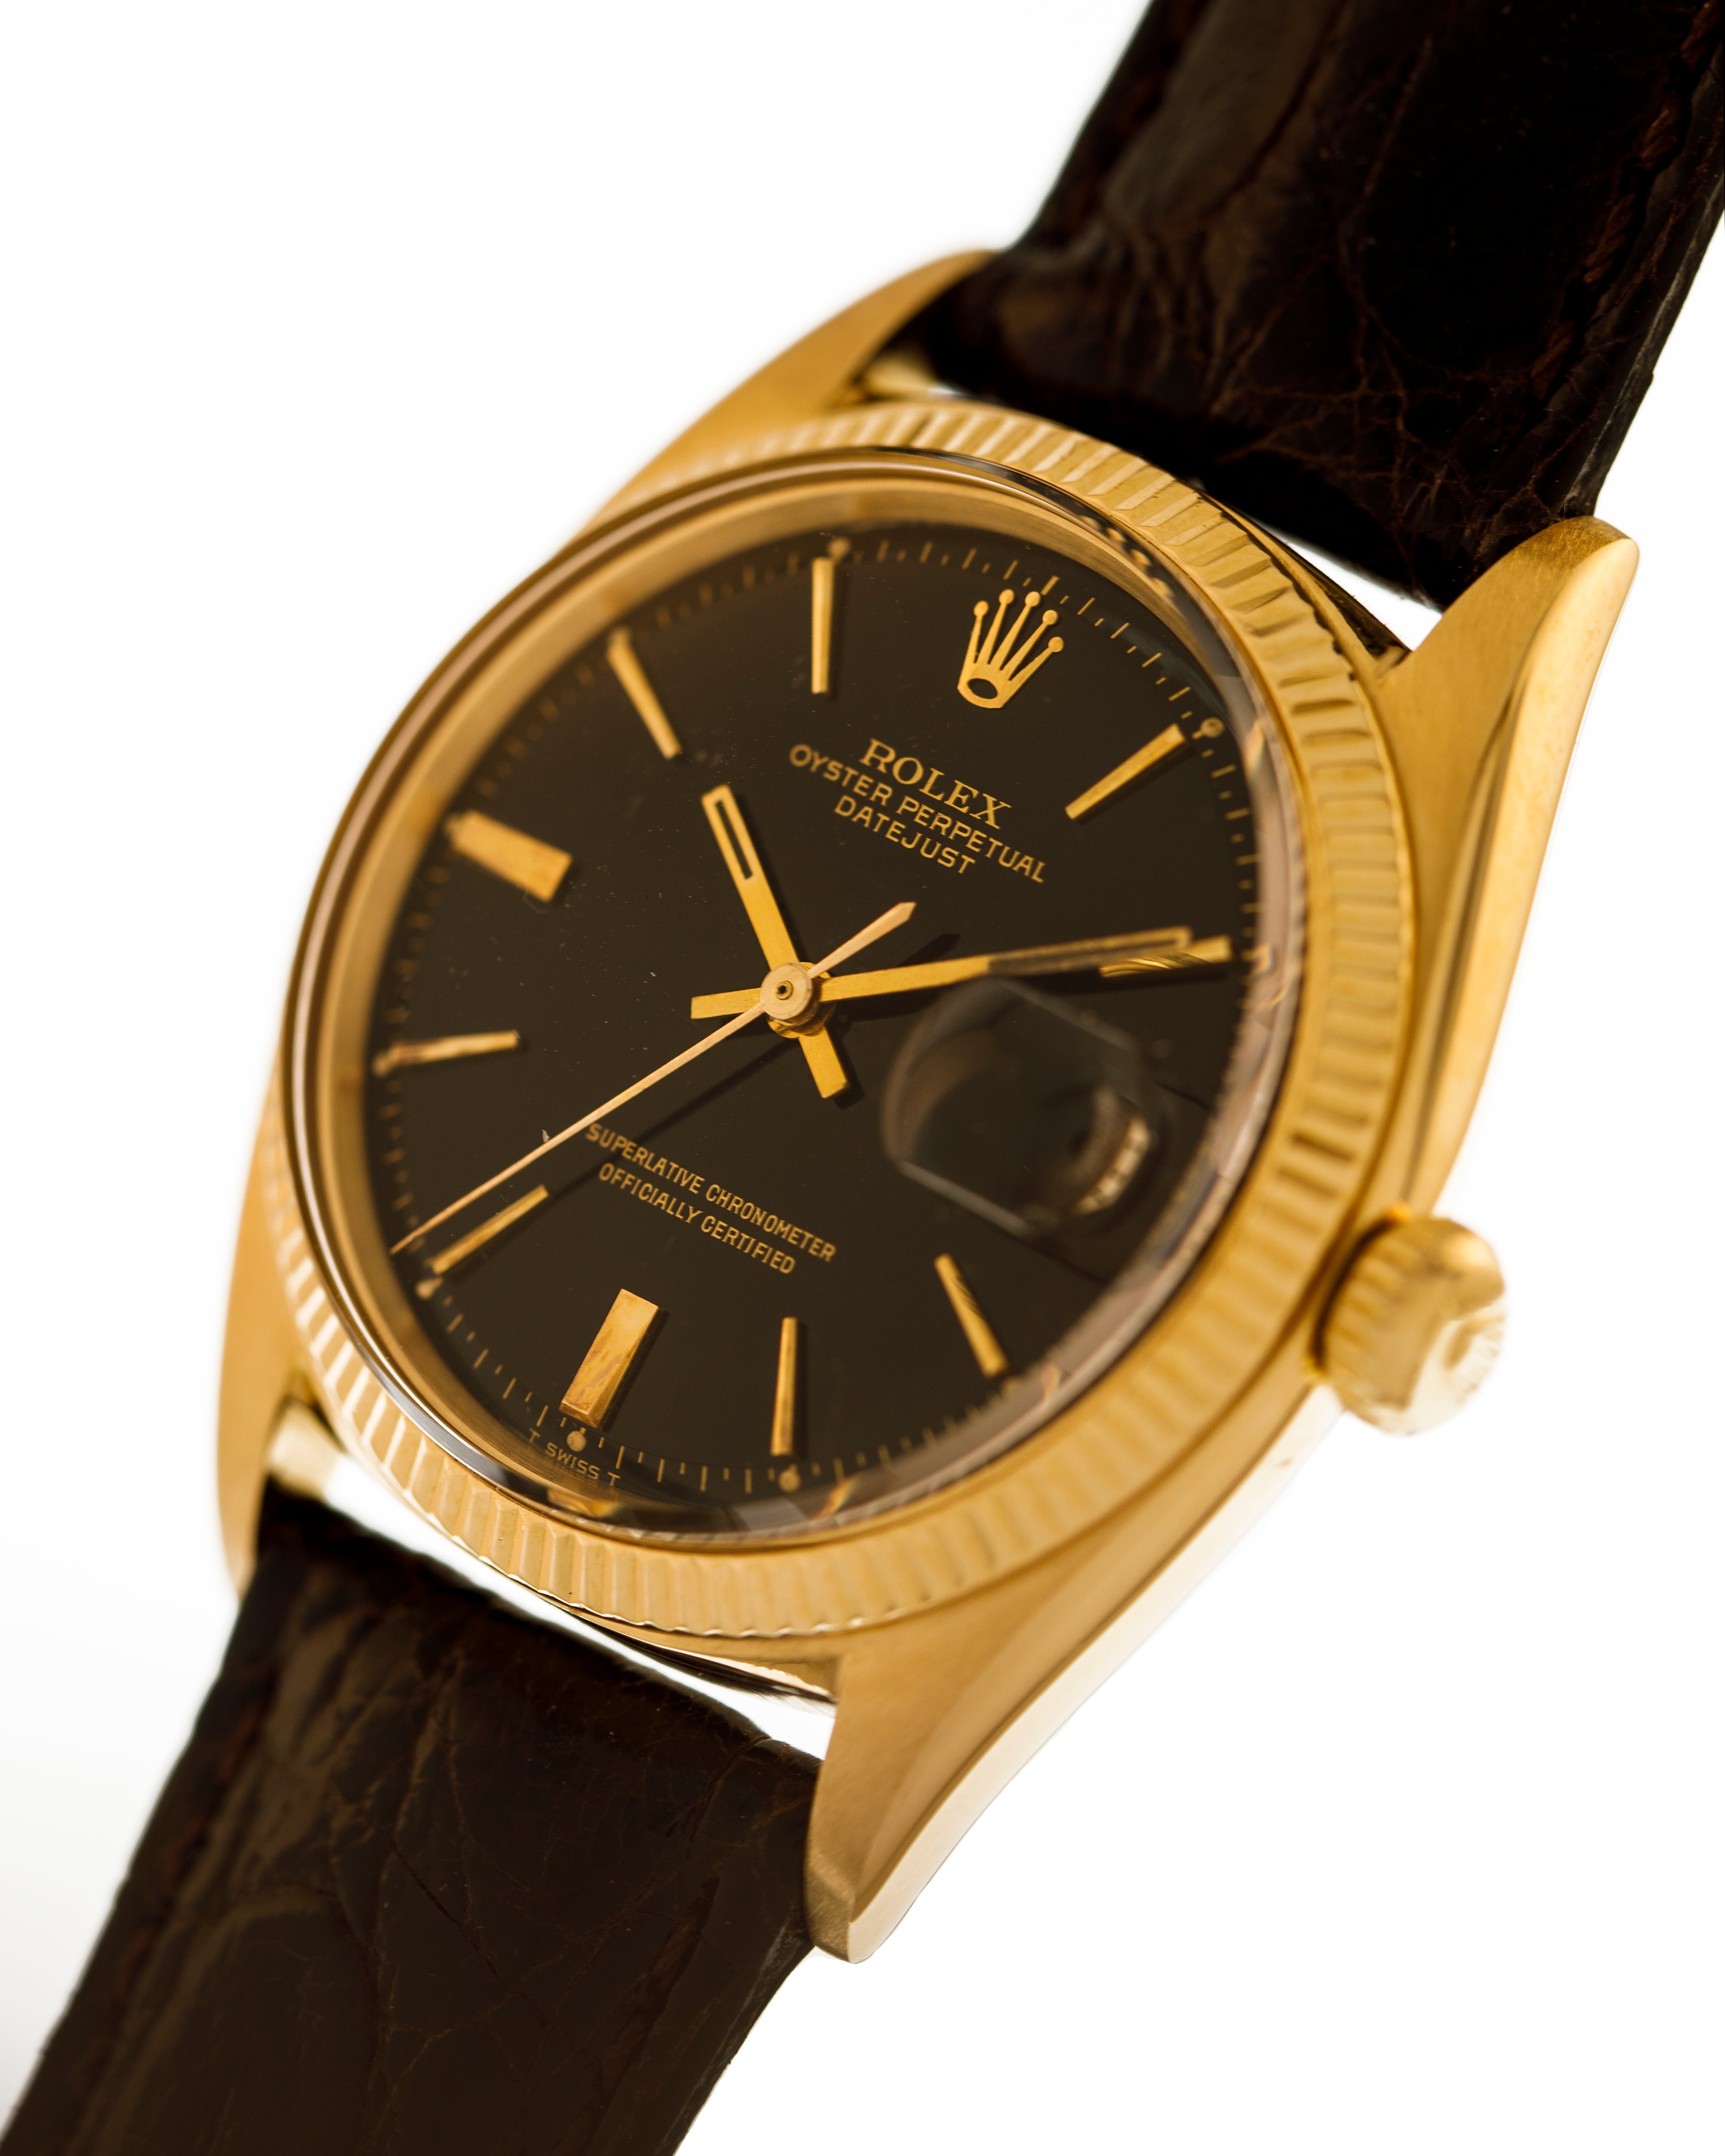 Rolex datejust ref. 1601 yellow gold and black